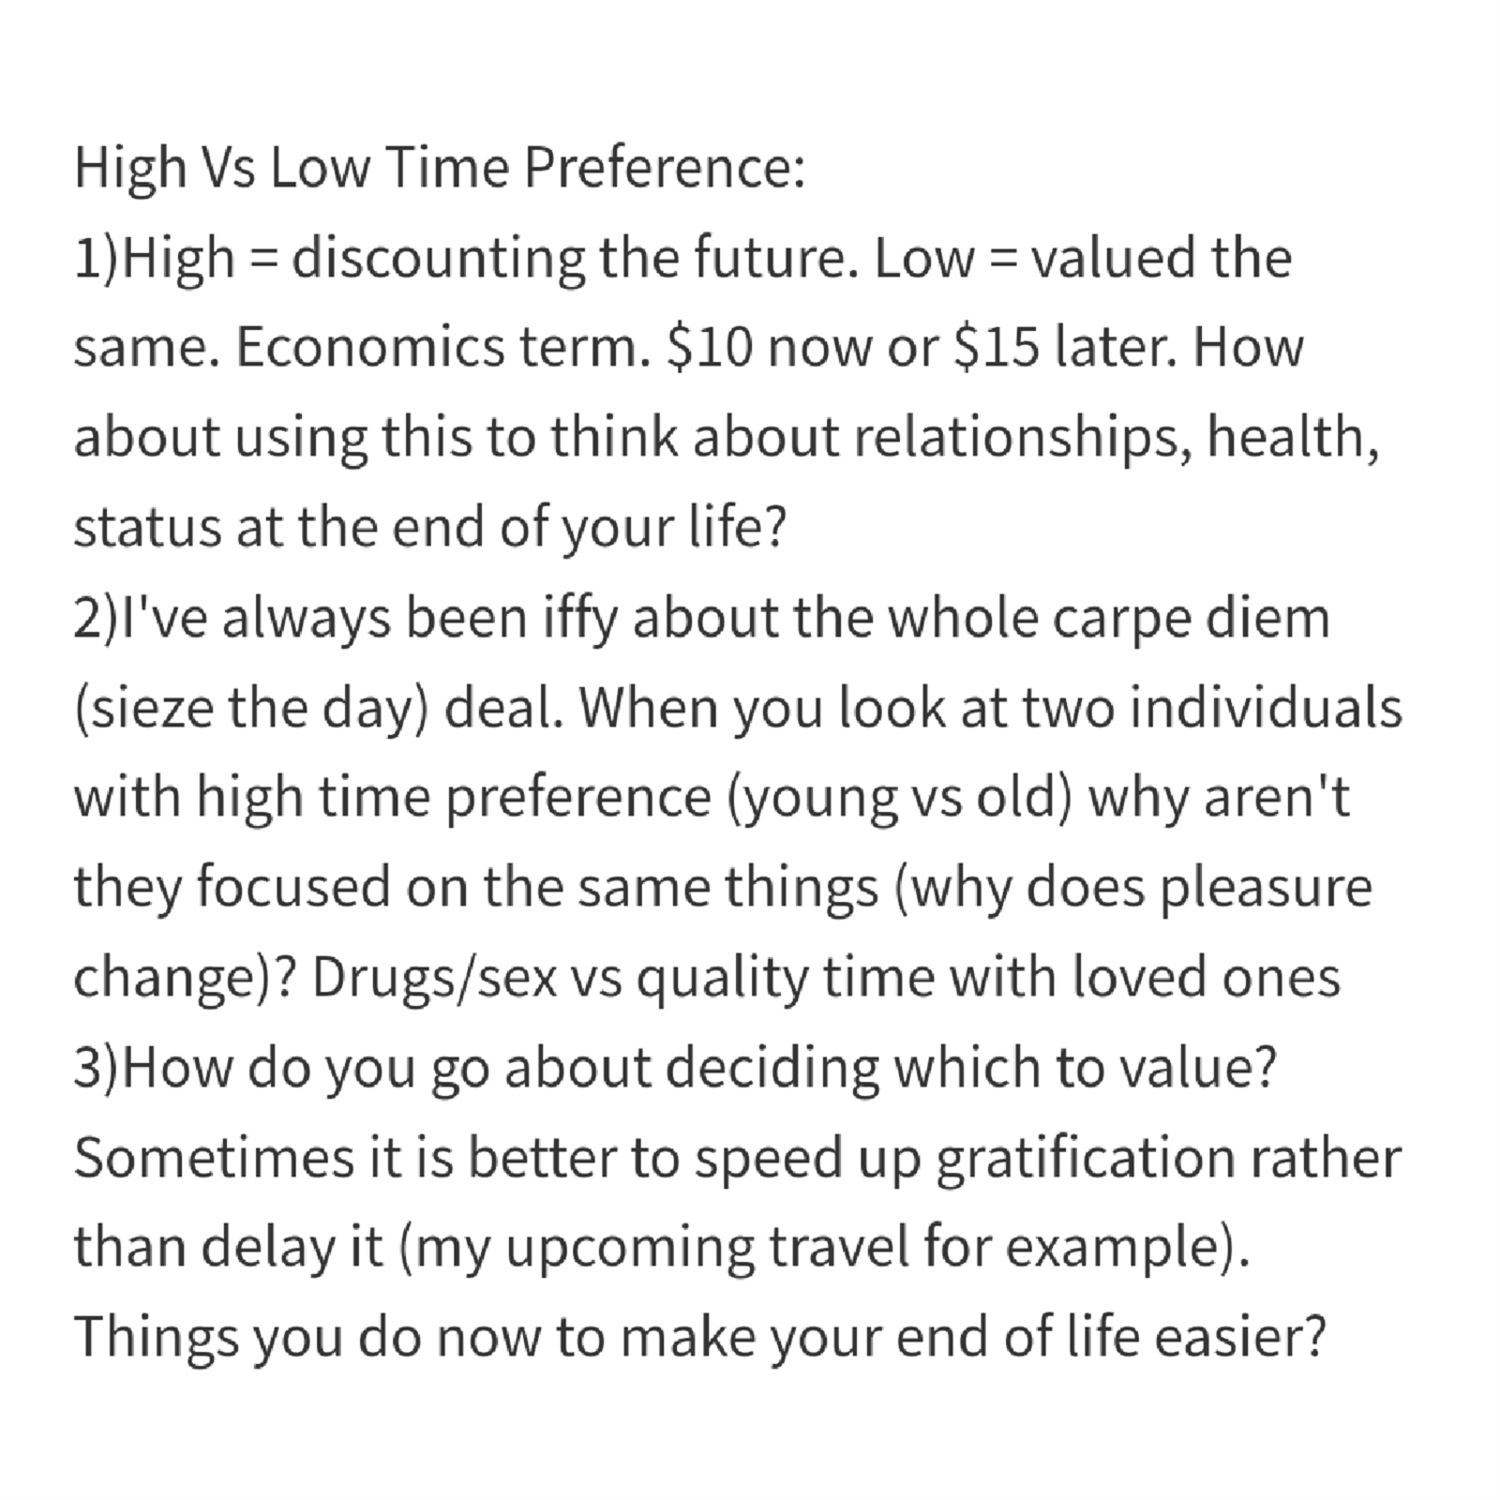 High vs low time preference